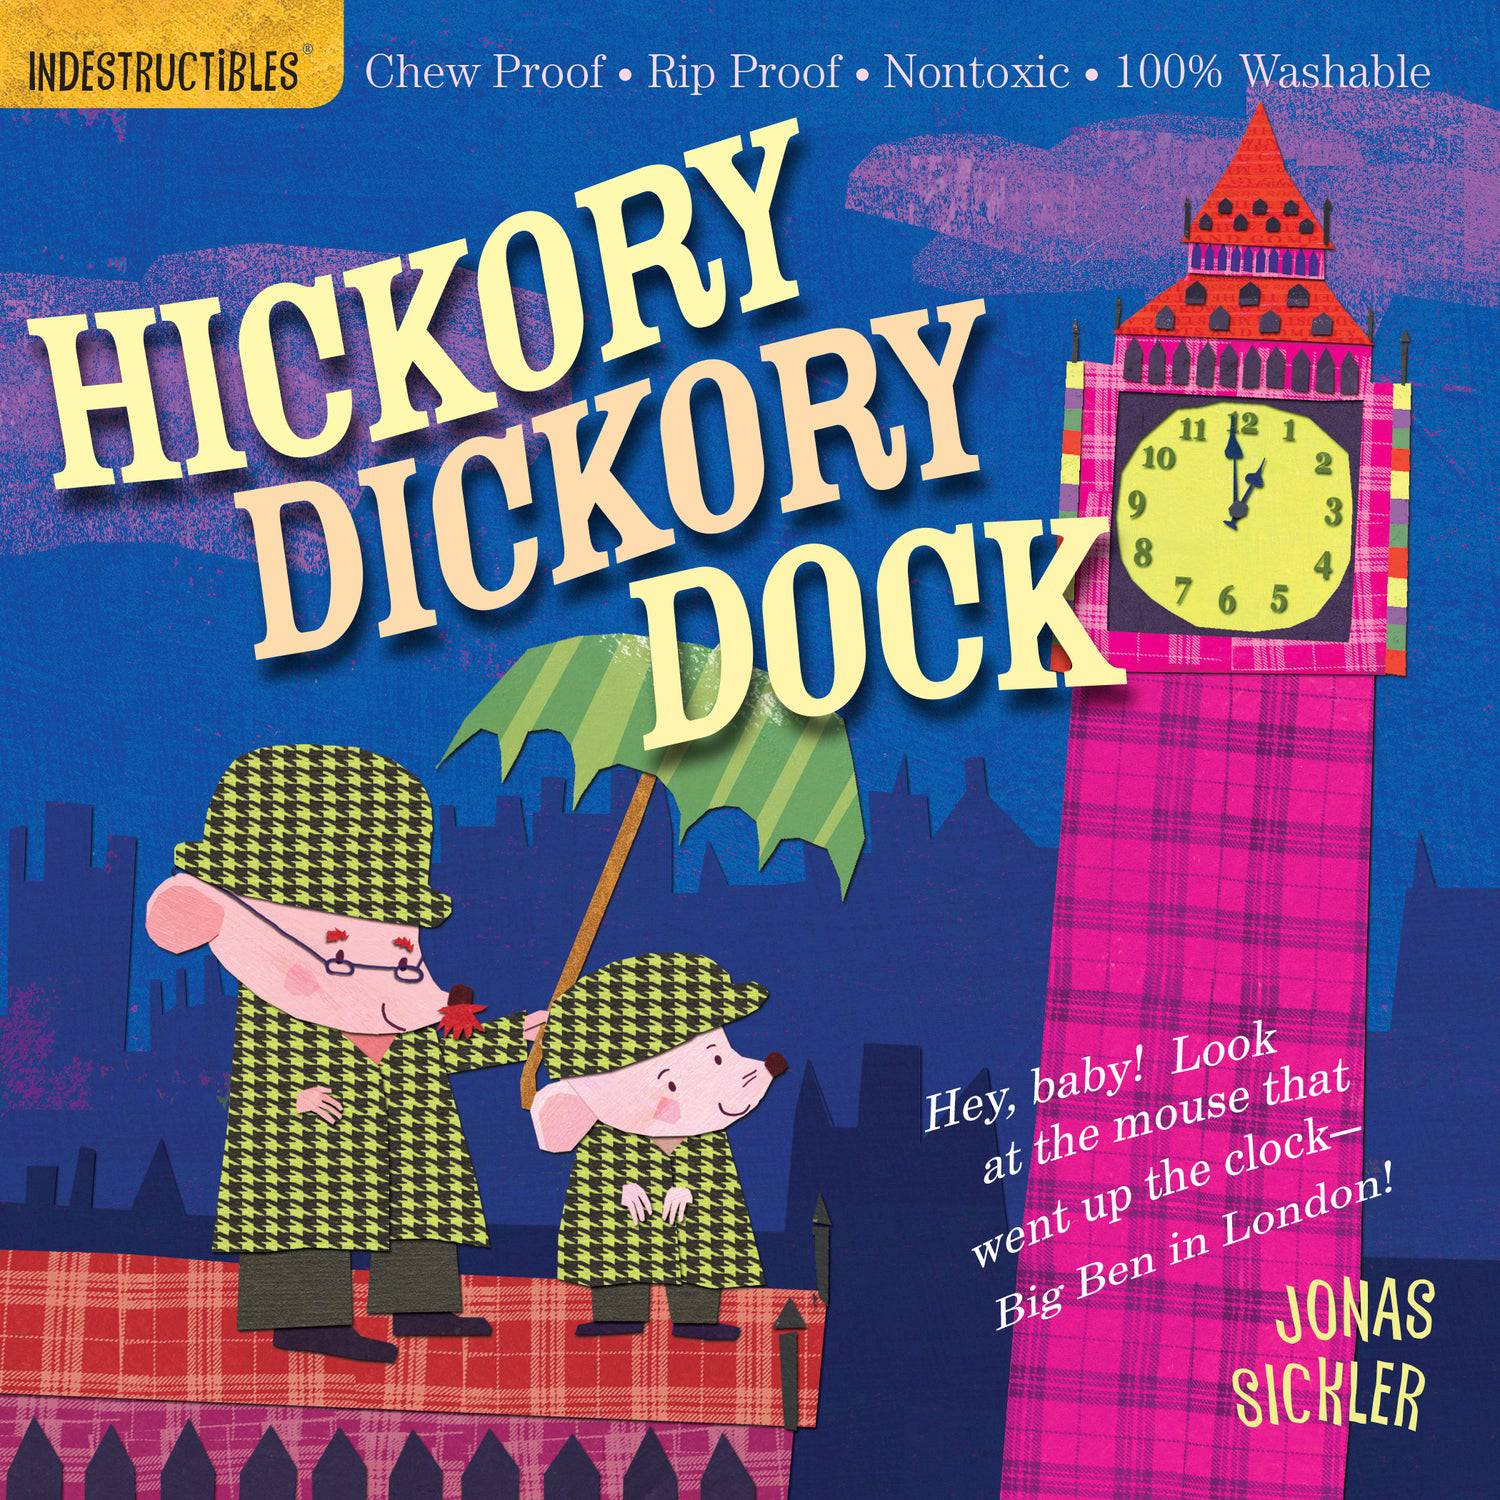 15921 HICKORY DICKORY DOCK - A Child's Delight